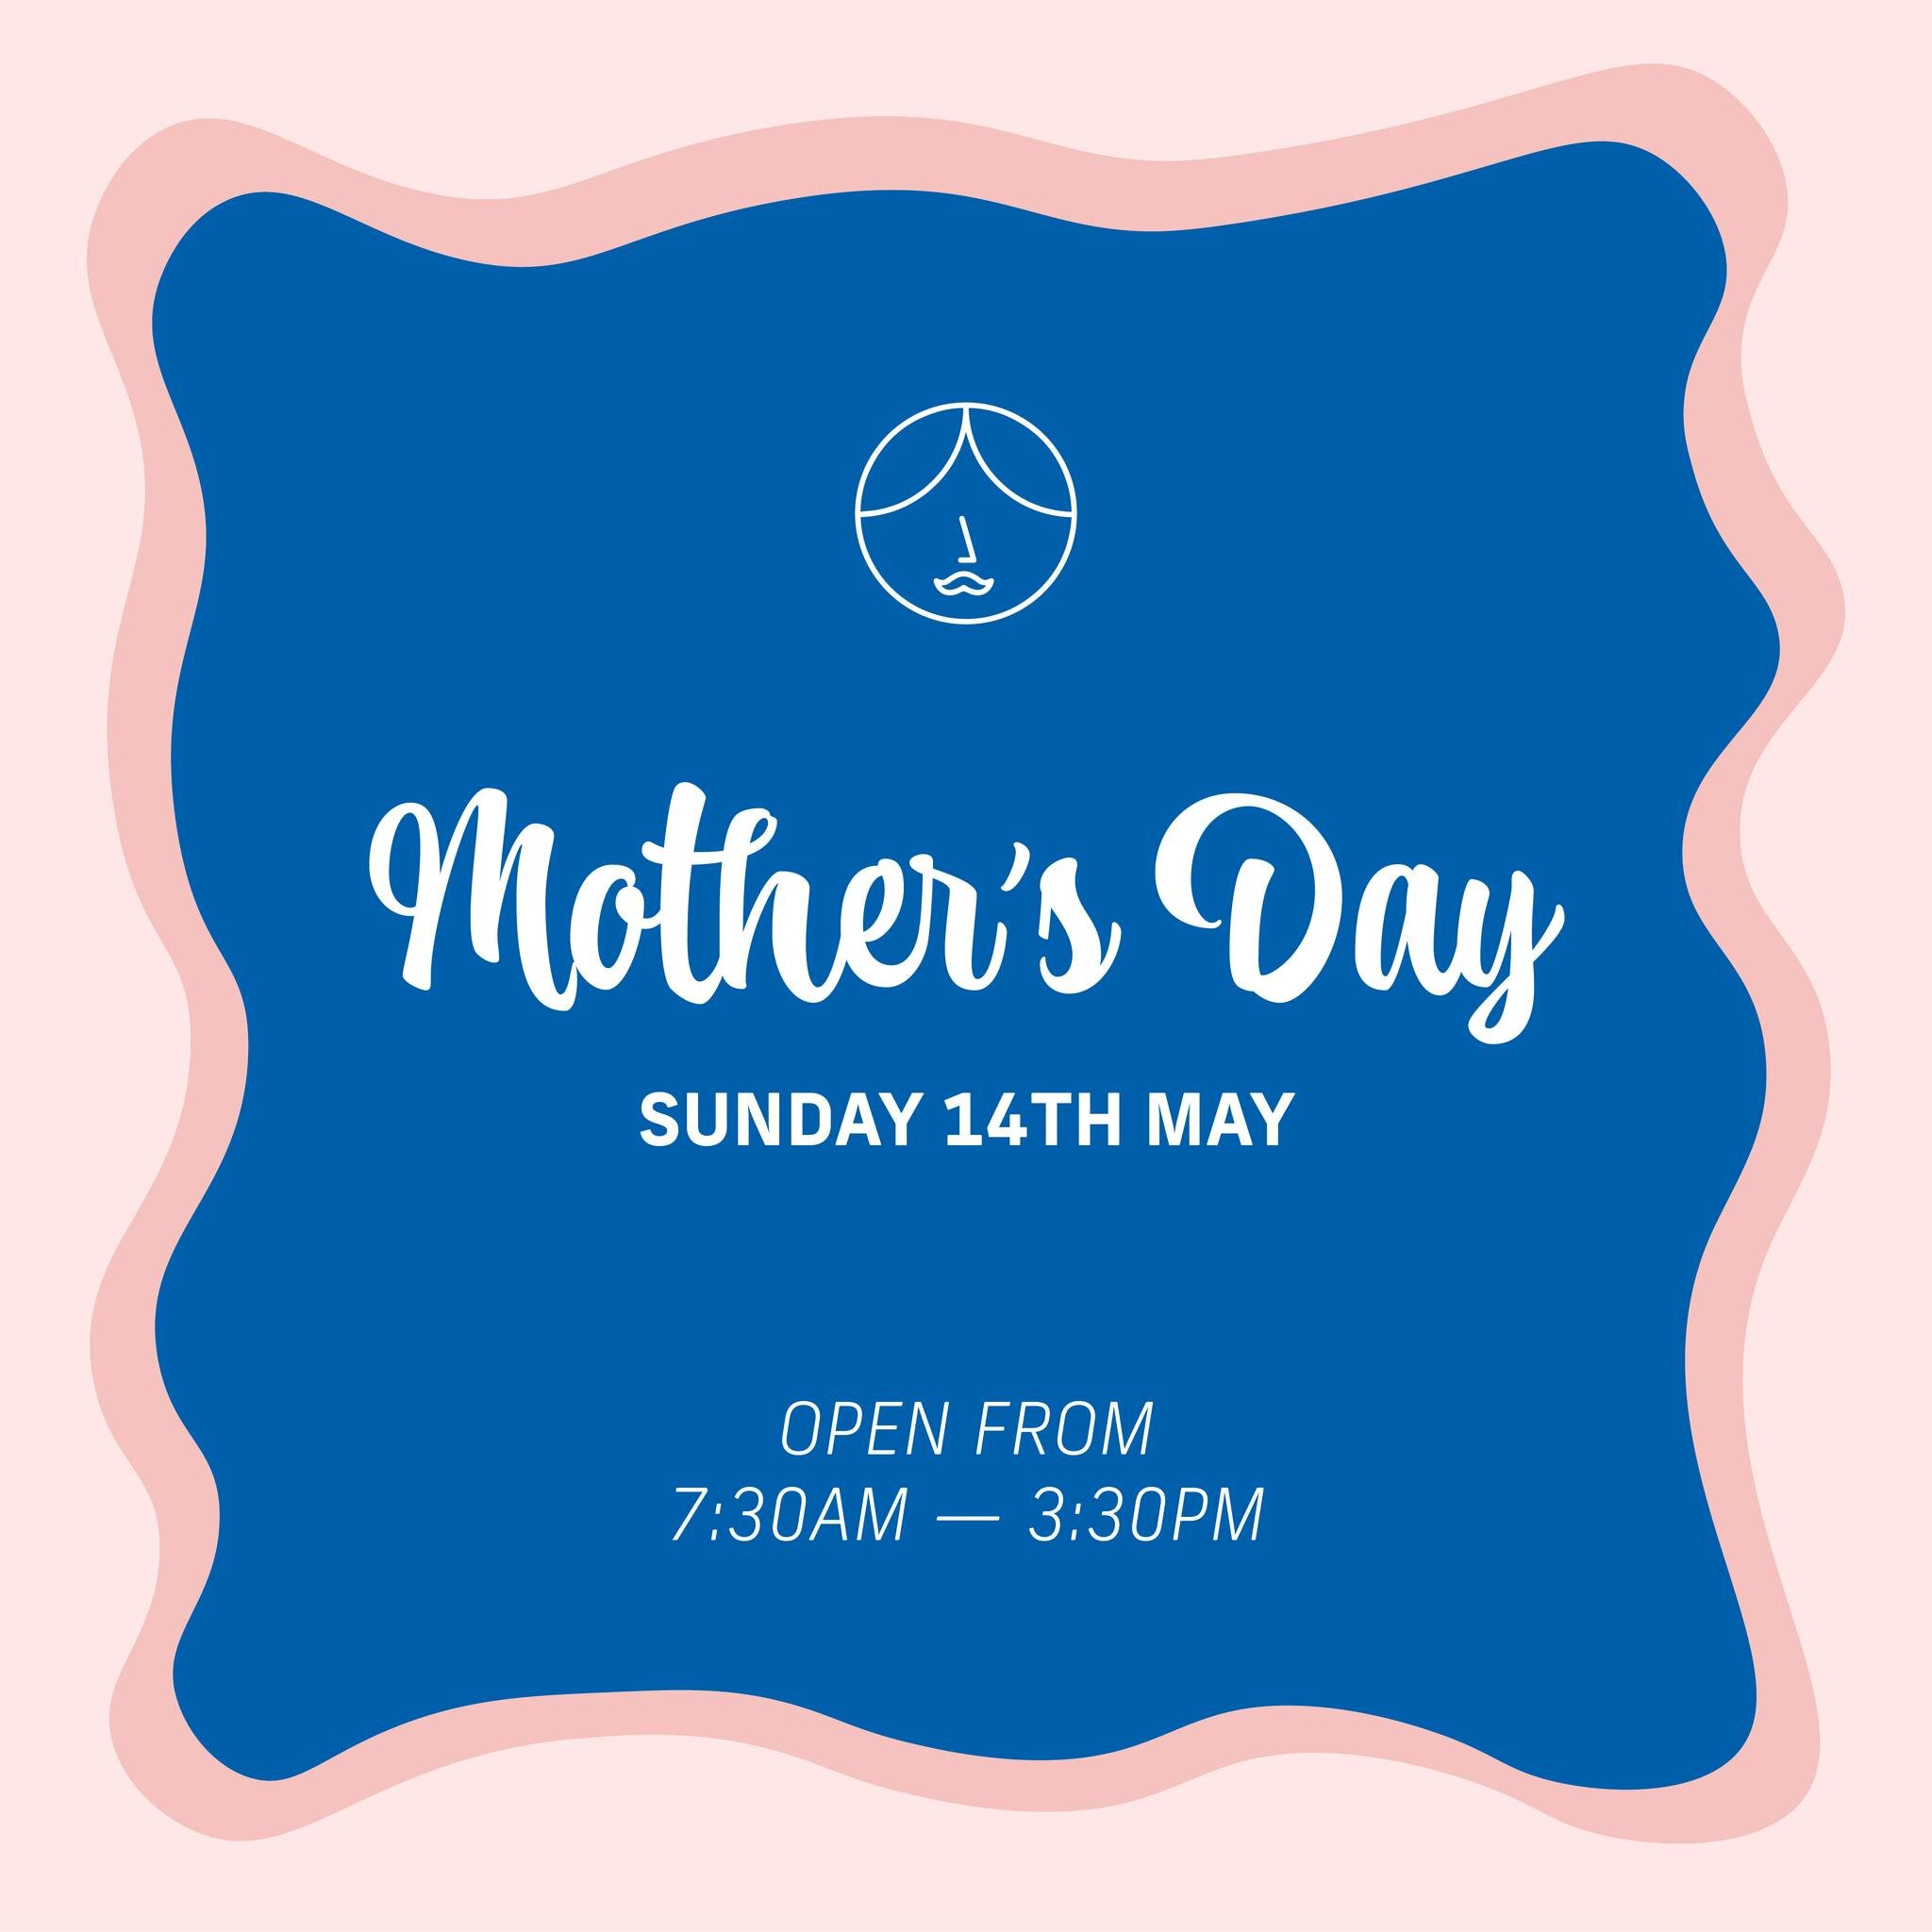 Mother's Day is just around the corner! Don't miss out, give us a call or email us to reserve your spot for next Sunday 💖

🖥 mrsistercafe@icloud.com
📞 03 9572 4420

#MrSisterCafe #mothersday #treatmum #malverneastcafe #familylunch